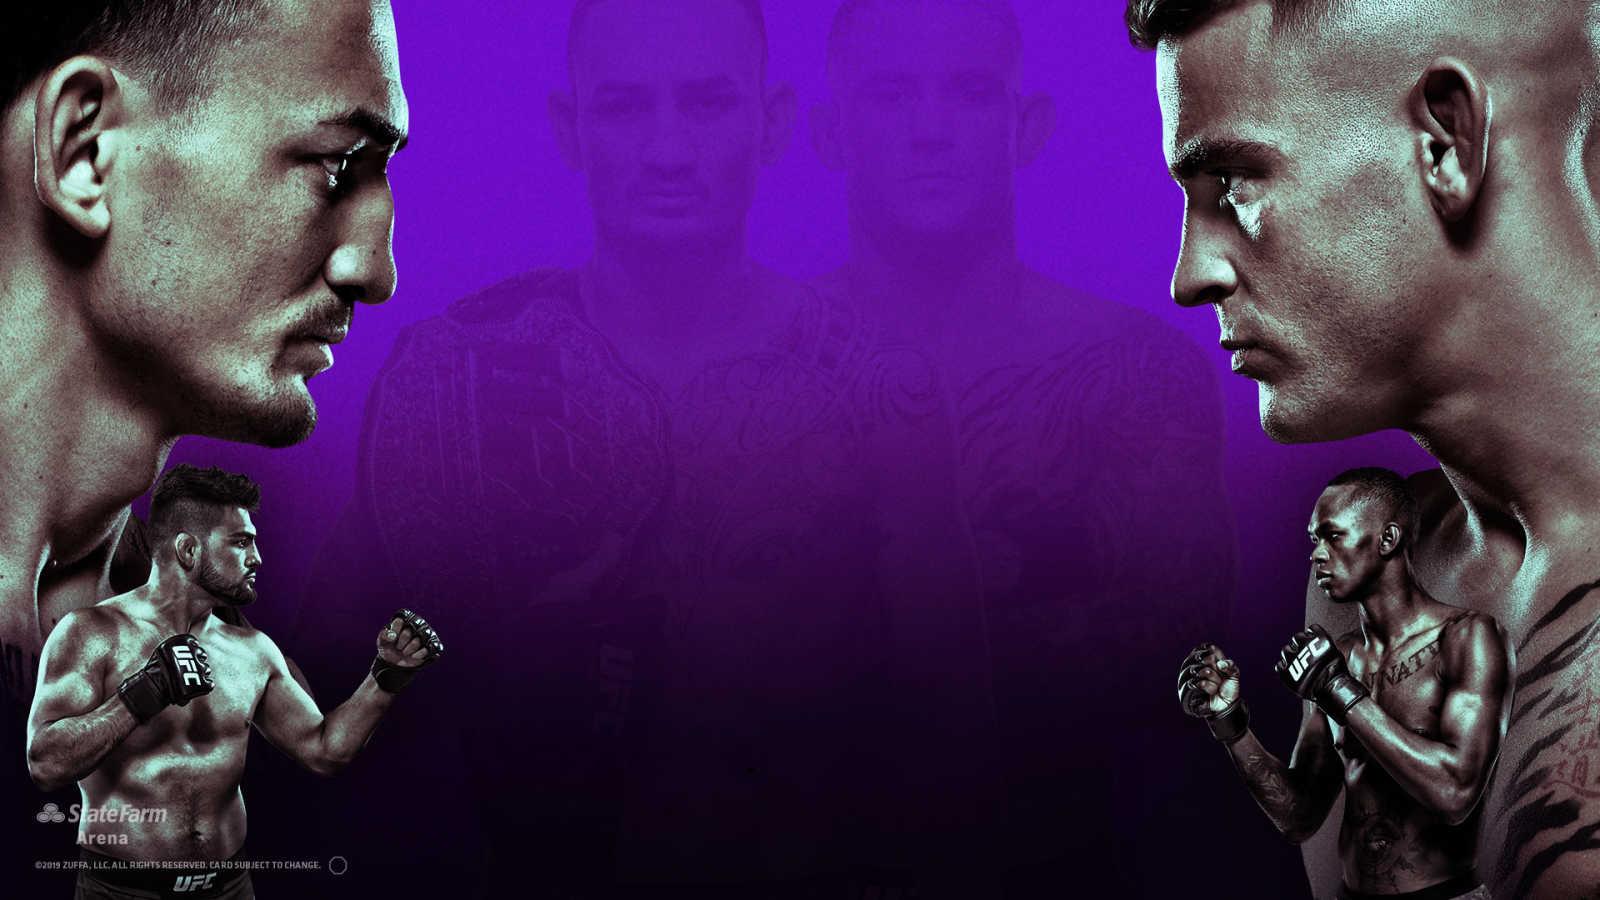 How To Watch UFC 236 On ESPN+